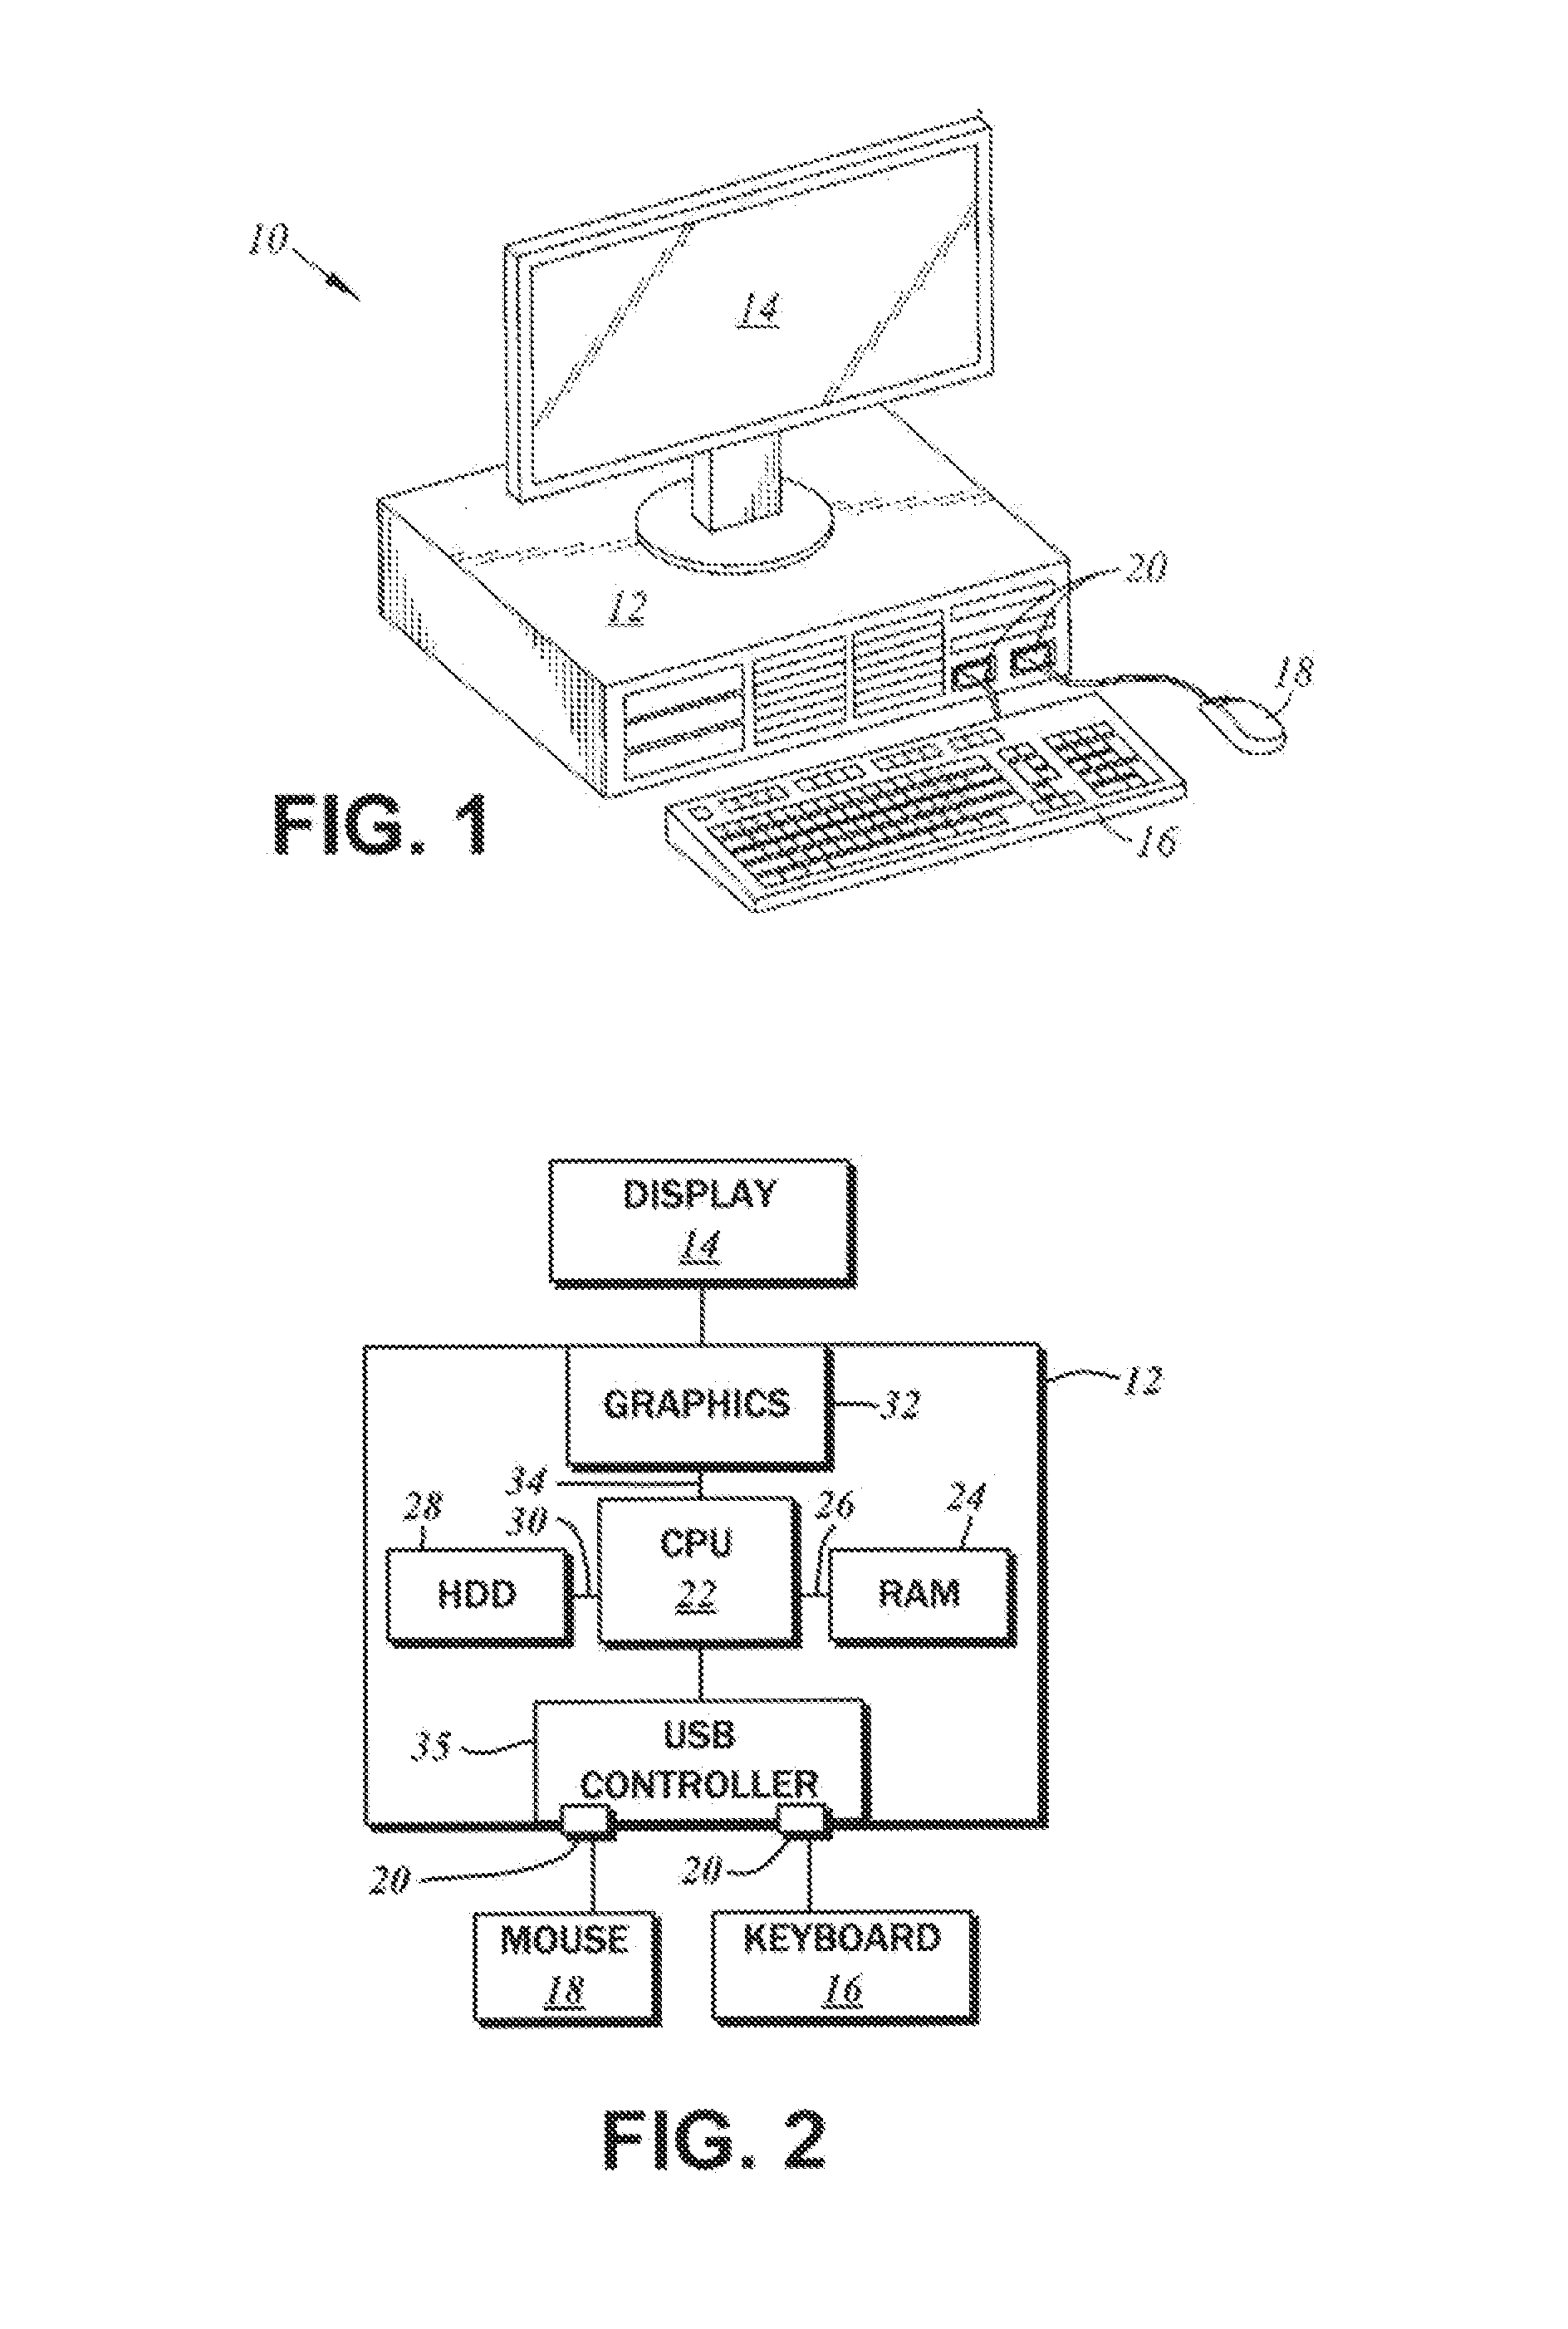 Method for color and size based pre-filtering for visual object searching of documents